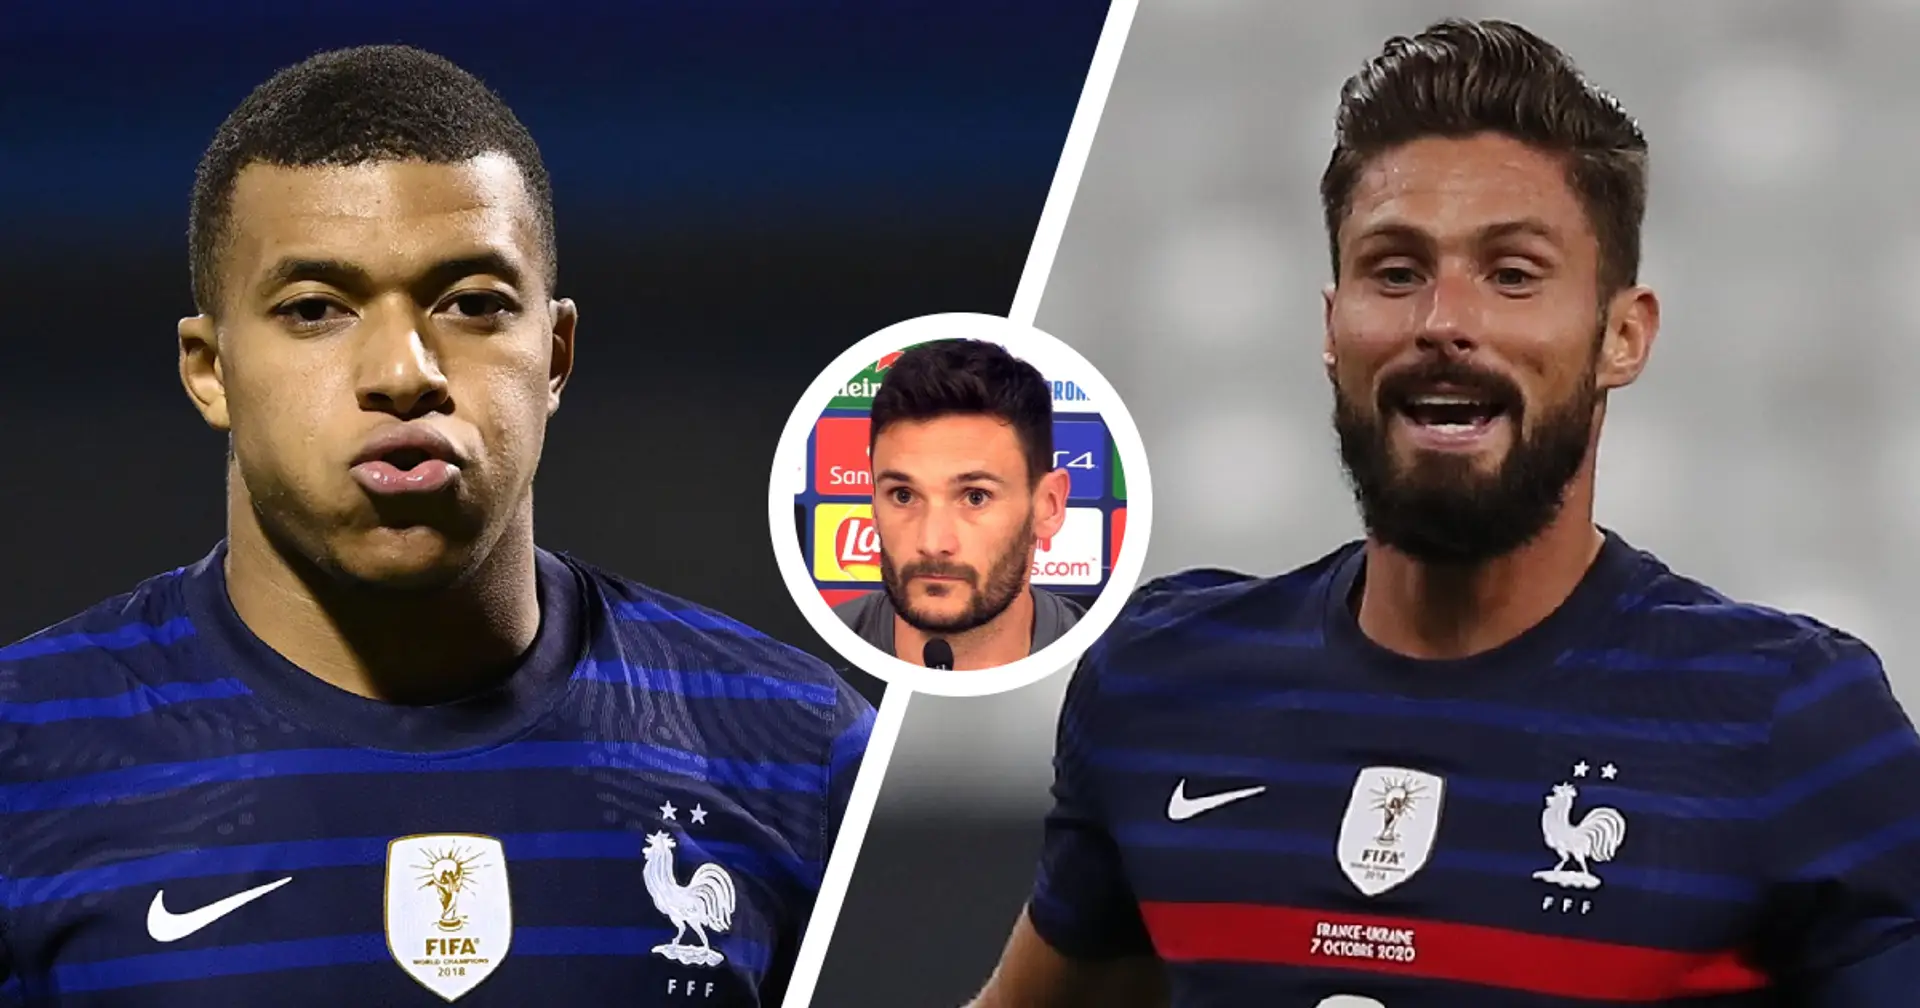 'It was a short discussion, nothing unusual': Lloris plays down Mbappe-Giroud feud 